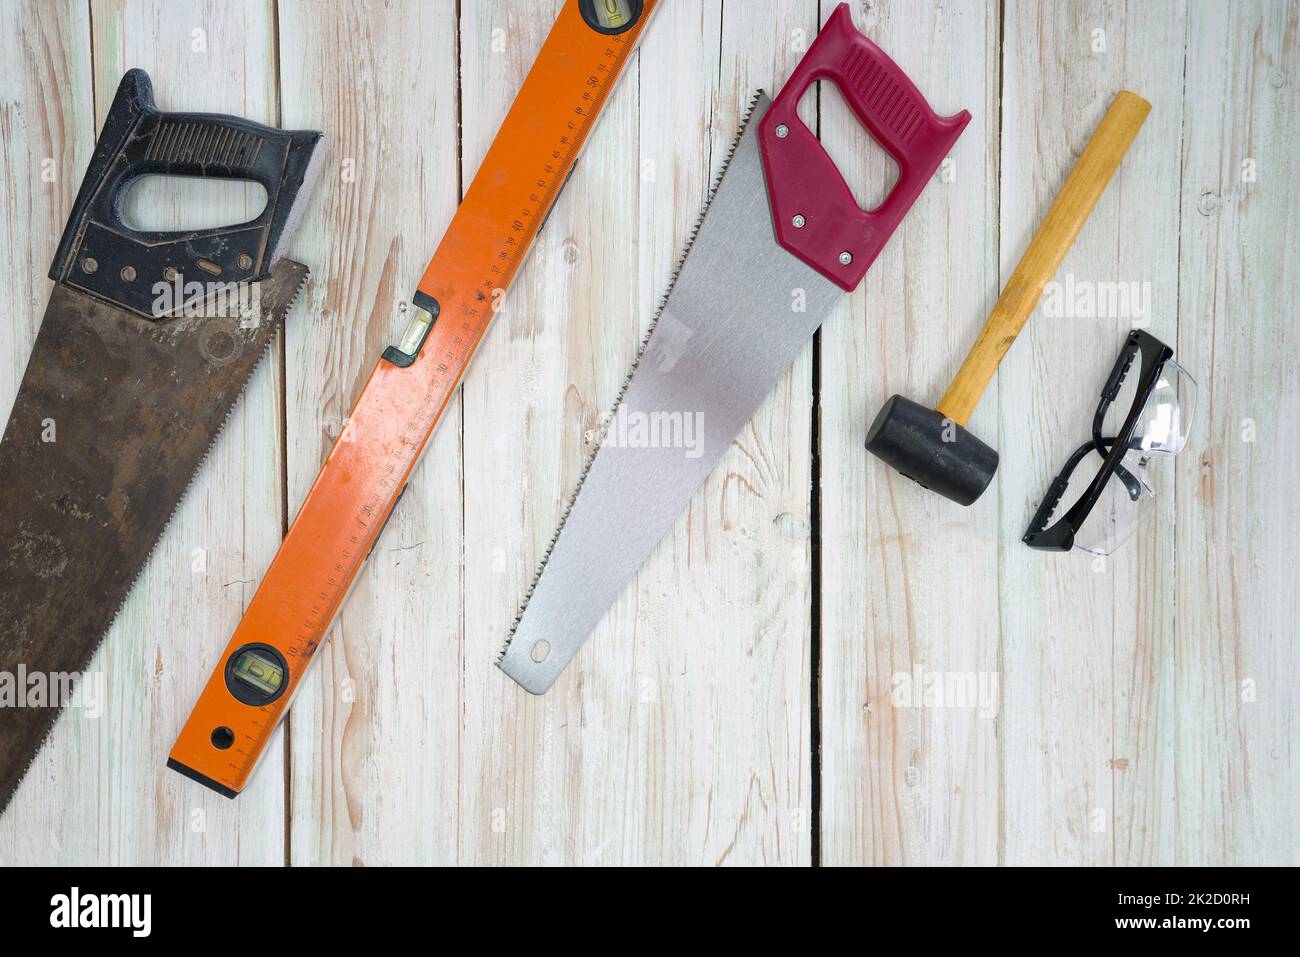 The equipment for woodworking is organized neatly on the wood floor. Ordered as follows, old saw full of rust, orange magnetic aluminum level, red hand saw, yellow mallet, black dustproof glasses. Stock Photo